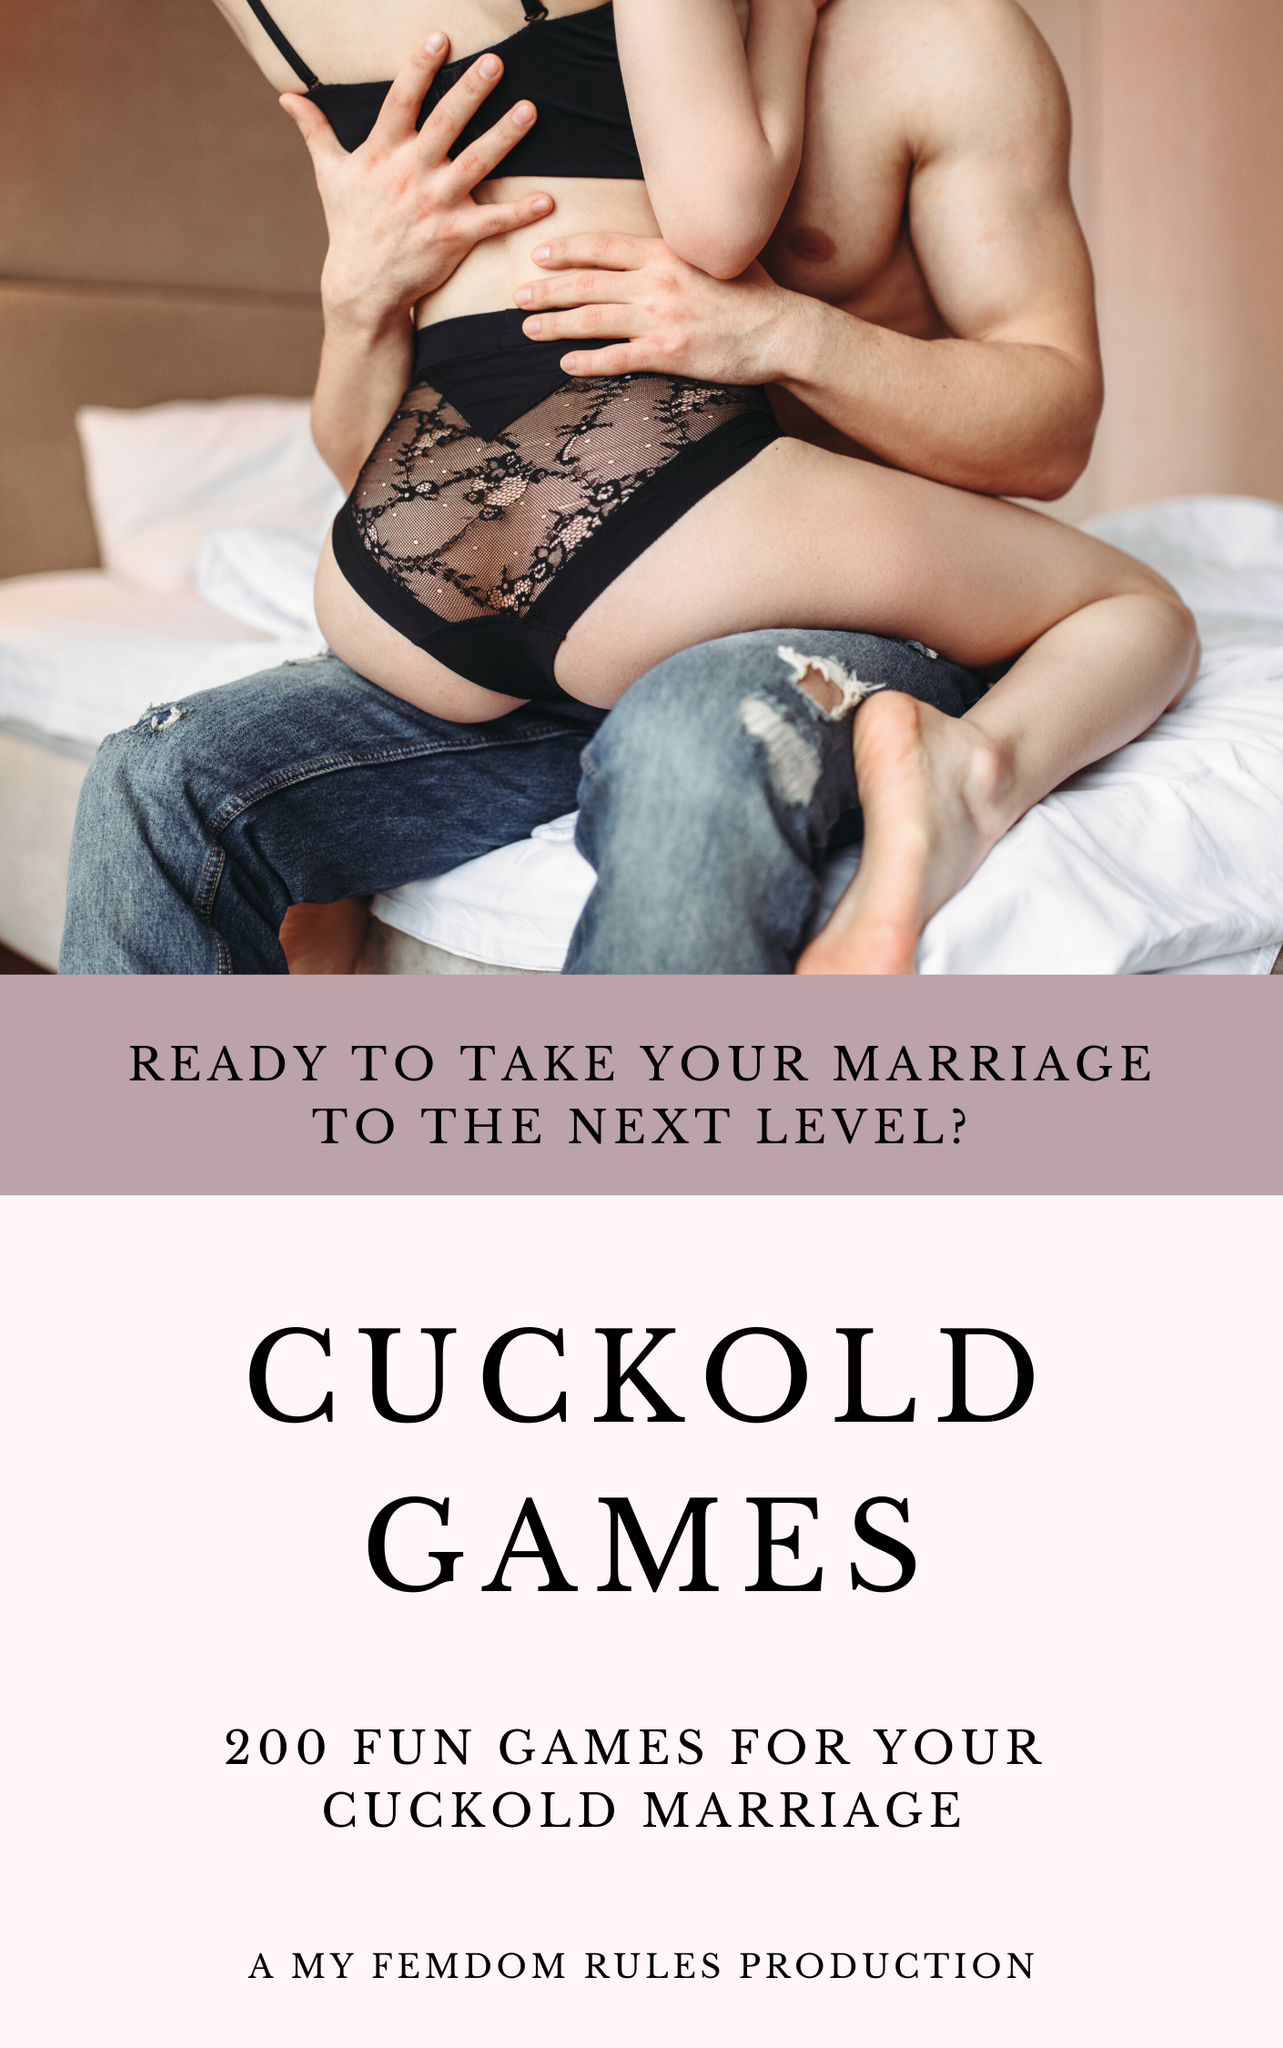 Cuckold Games 200 Fun Games For Your Cuckold Marriage (eBook) picture